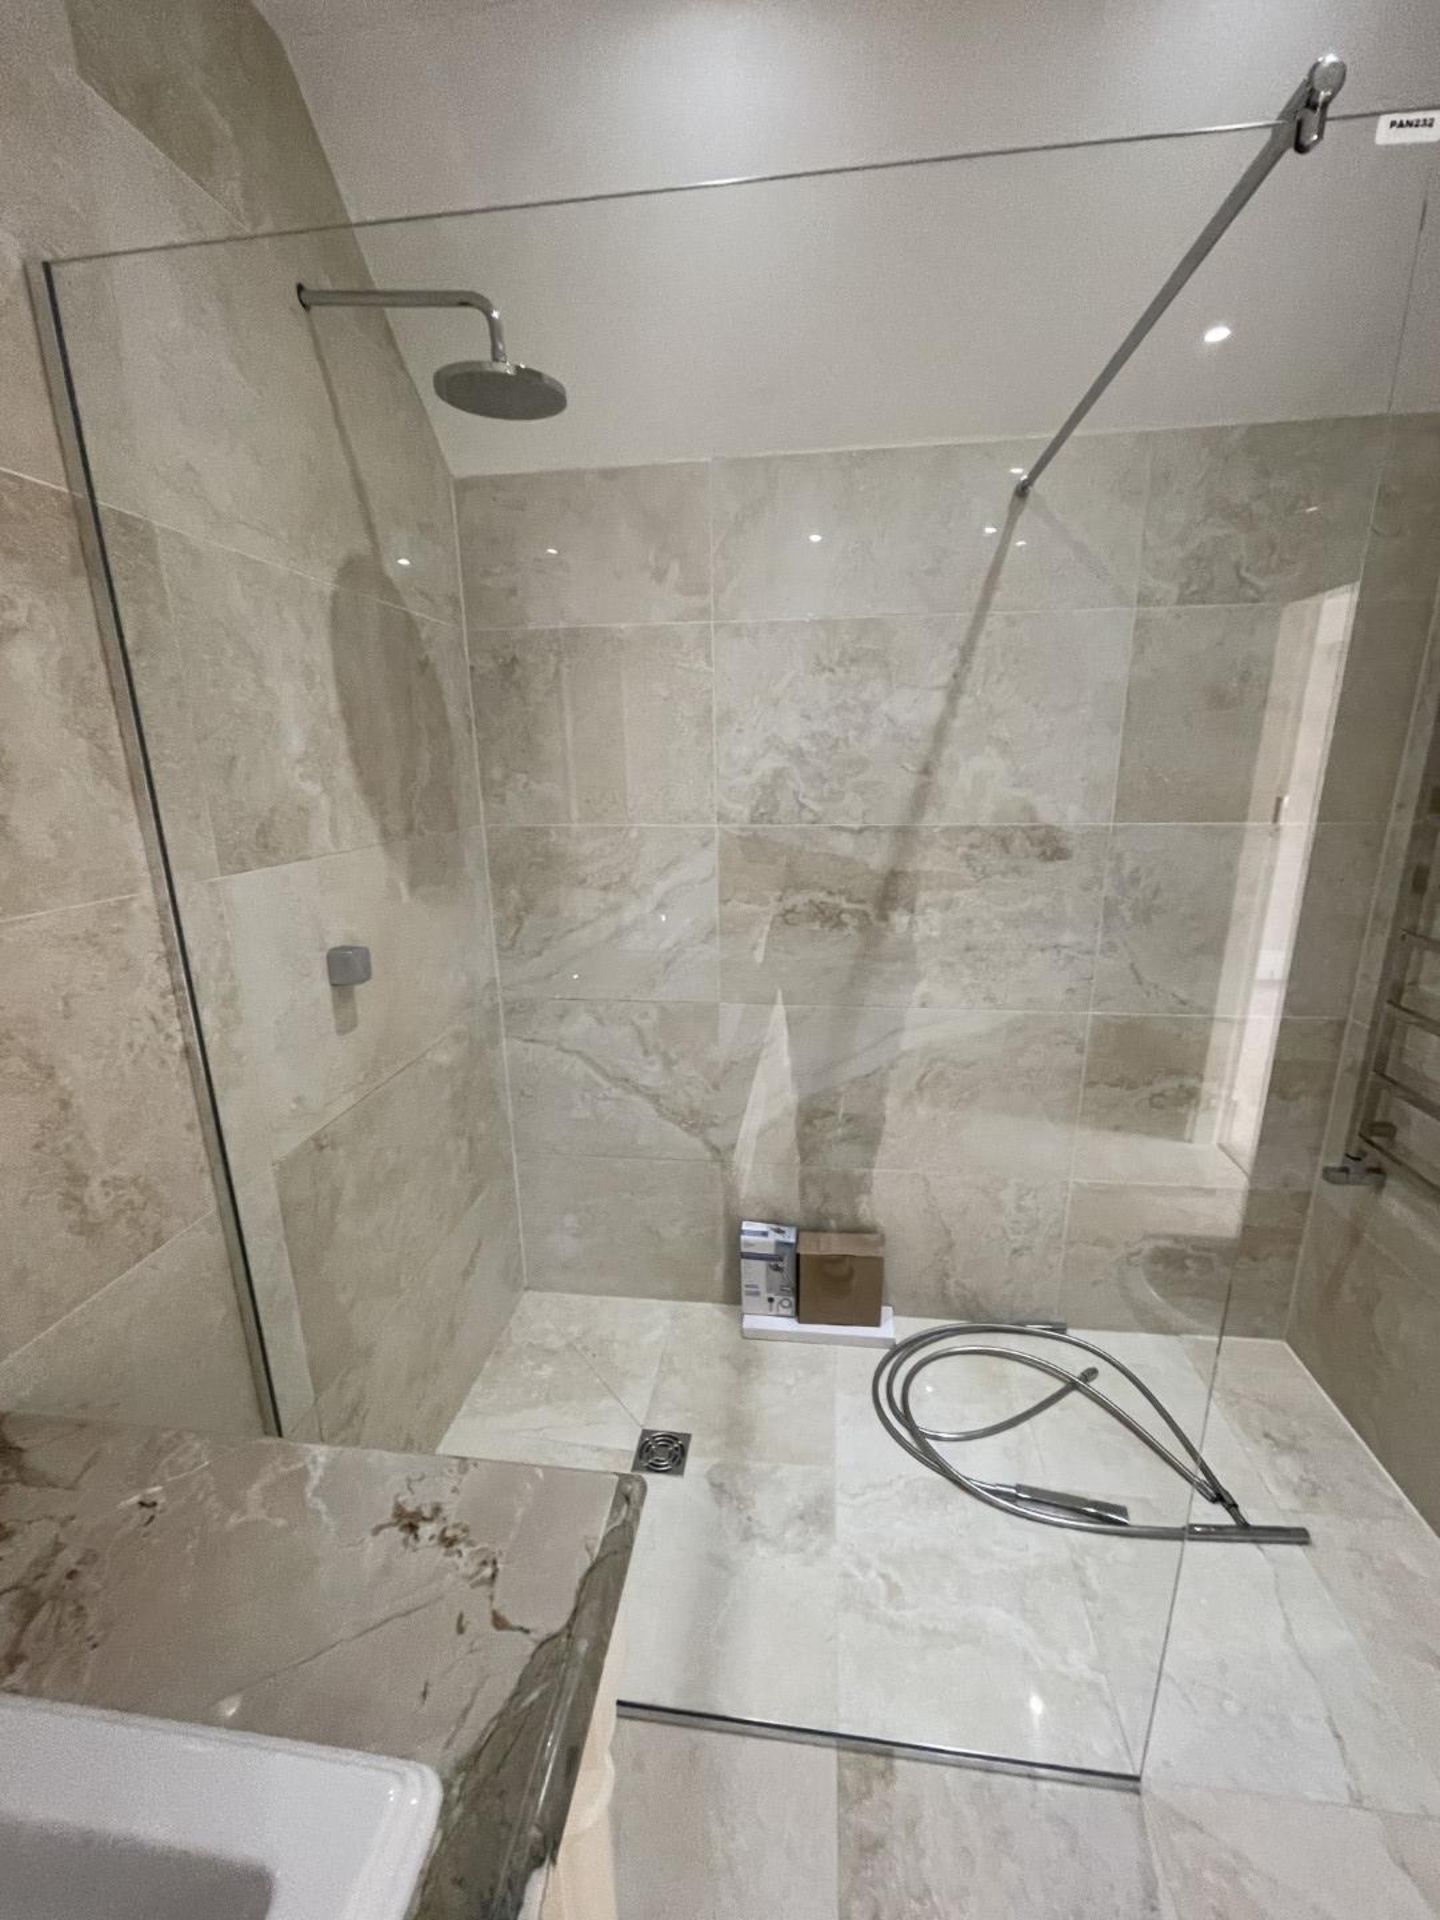 1 x Premium Shower and Enclosure + Hansgrove Controls and Thermostat - Ref: PAN232 - CL896 - NO - Image 11 of 21